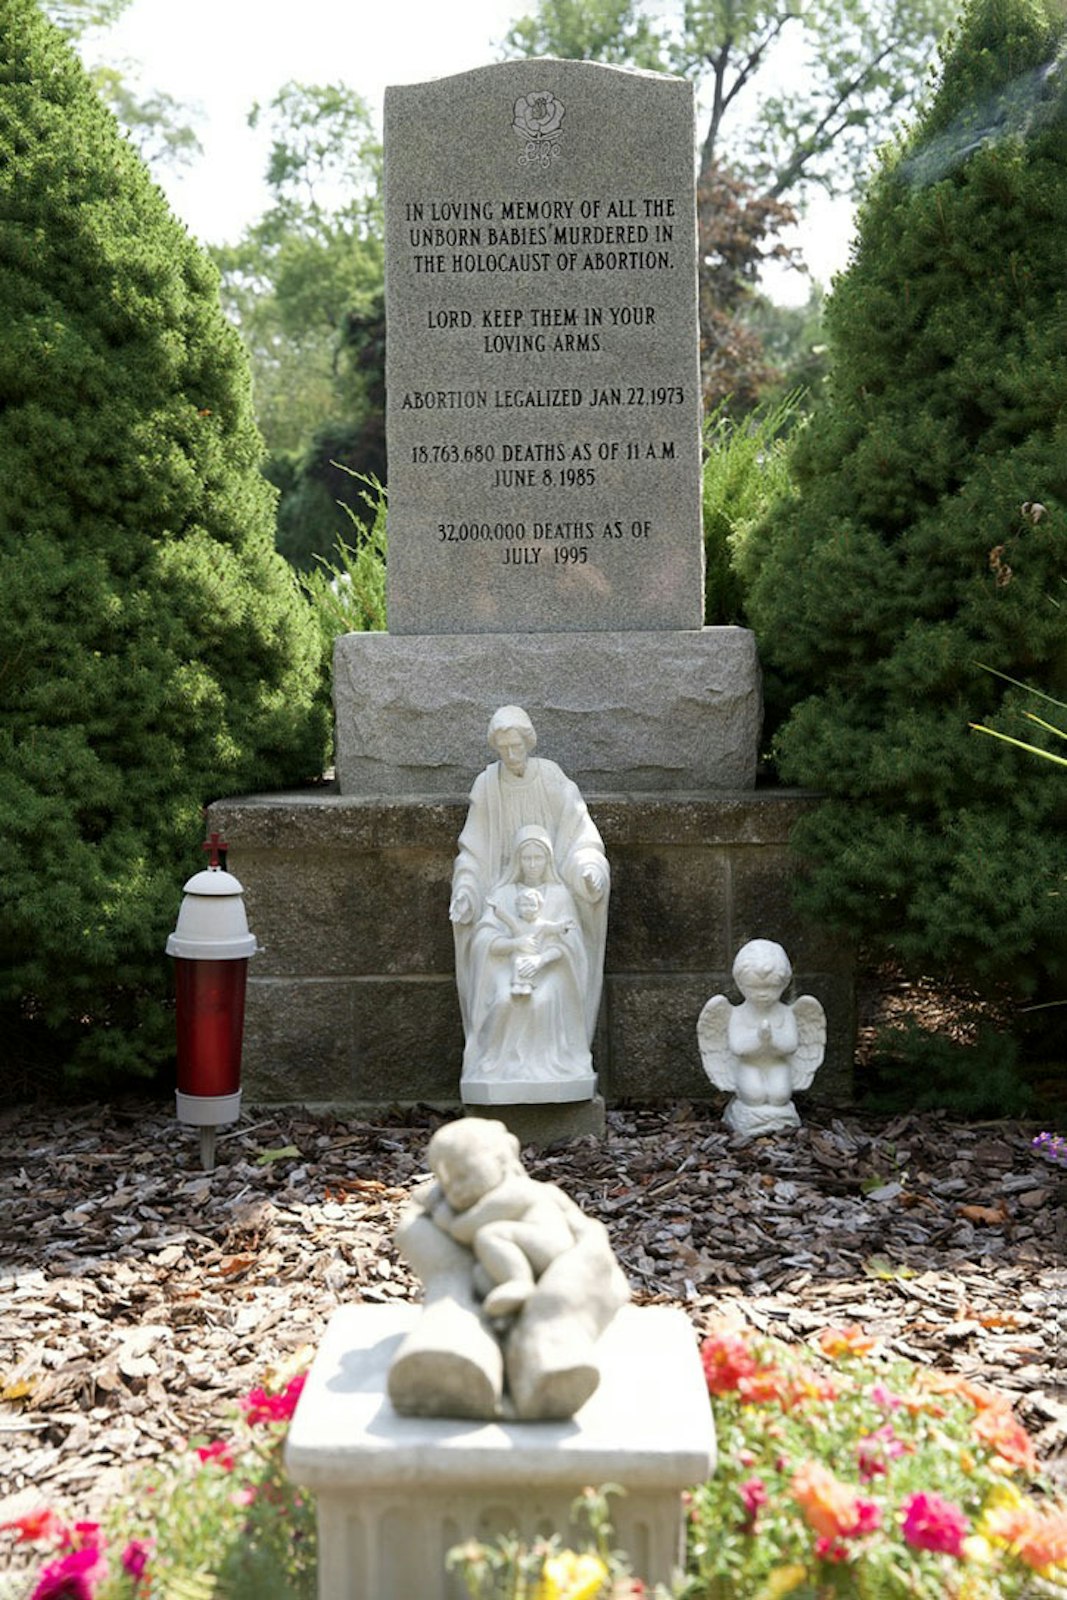 A gravesite marks the location where 30 victims of abortion are buried at Assumption Grotto Cemetery in northwest Detroit.